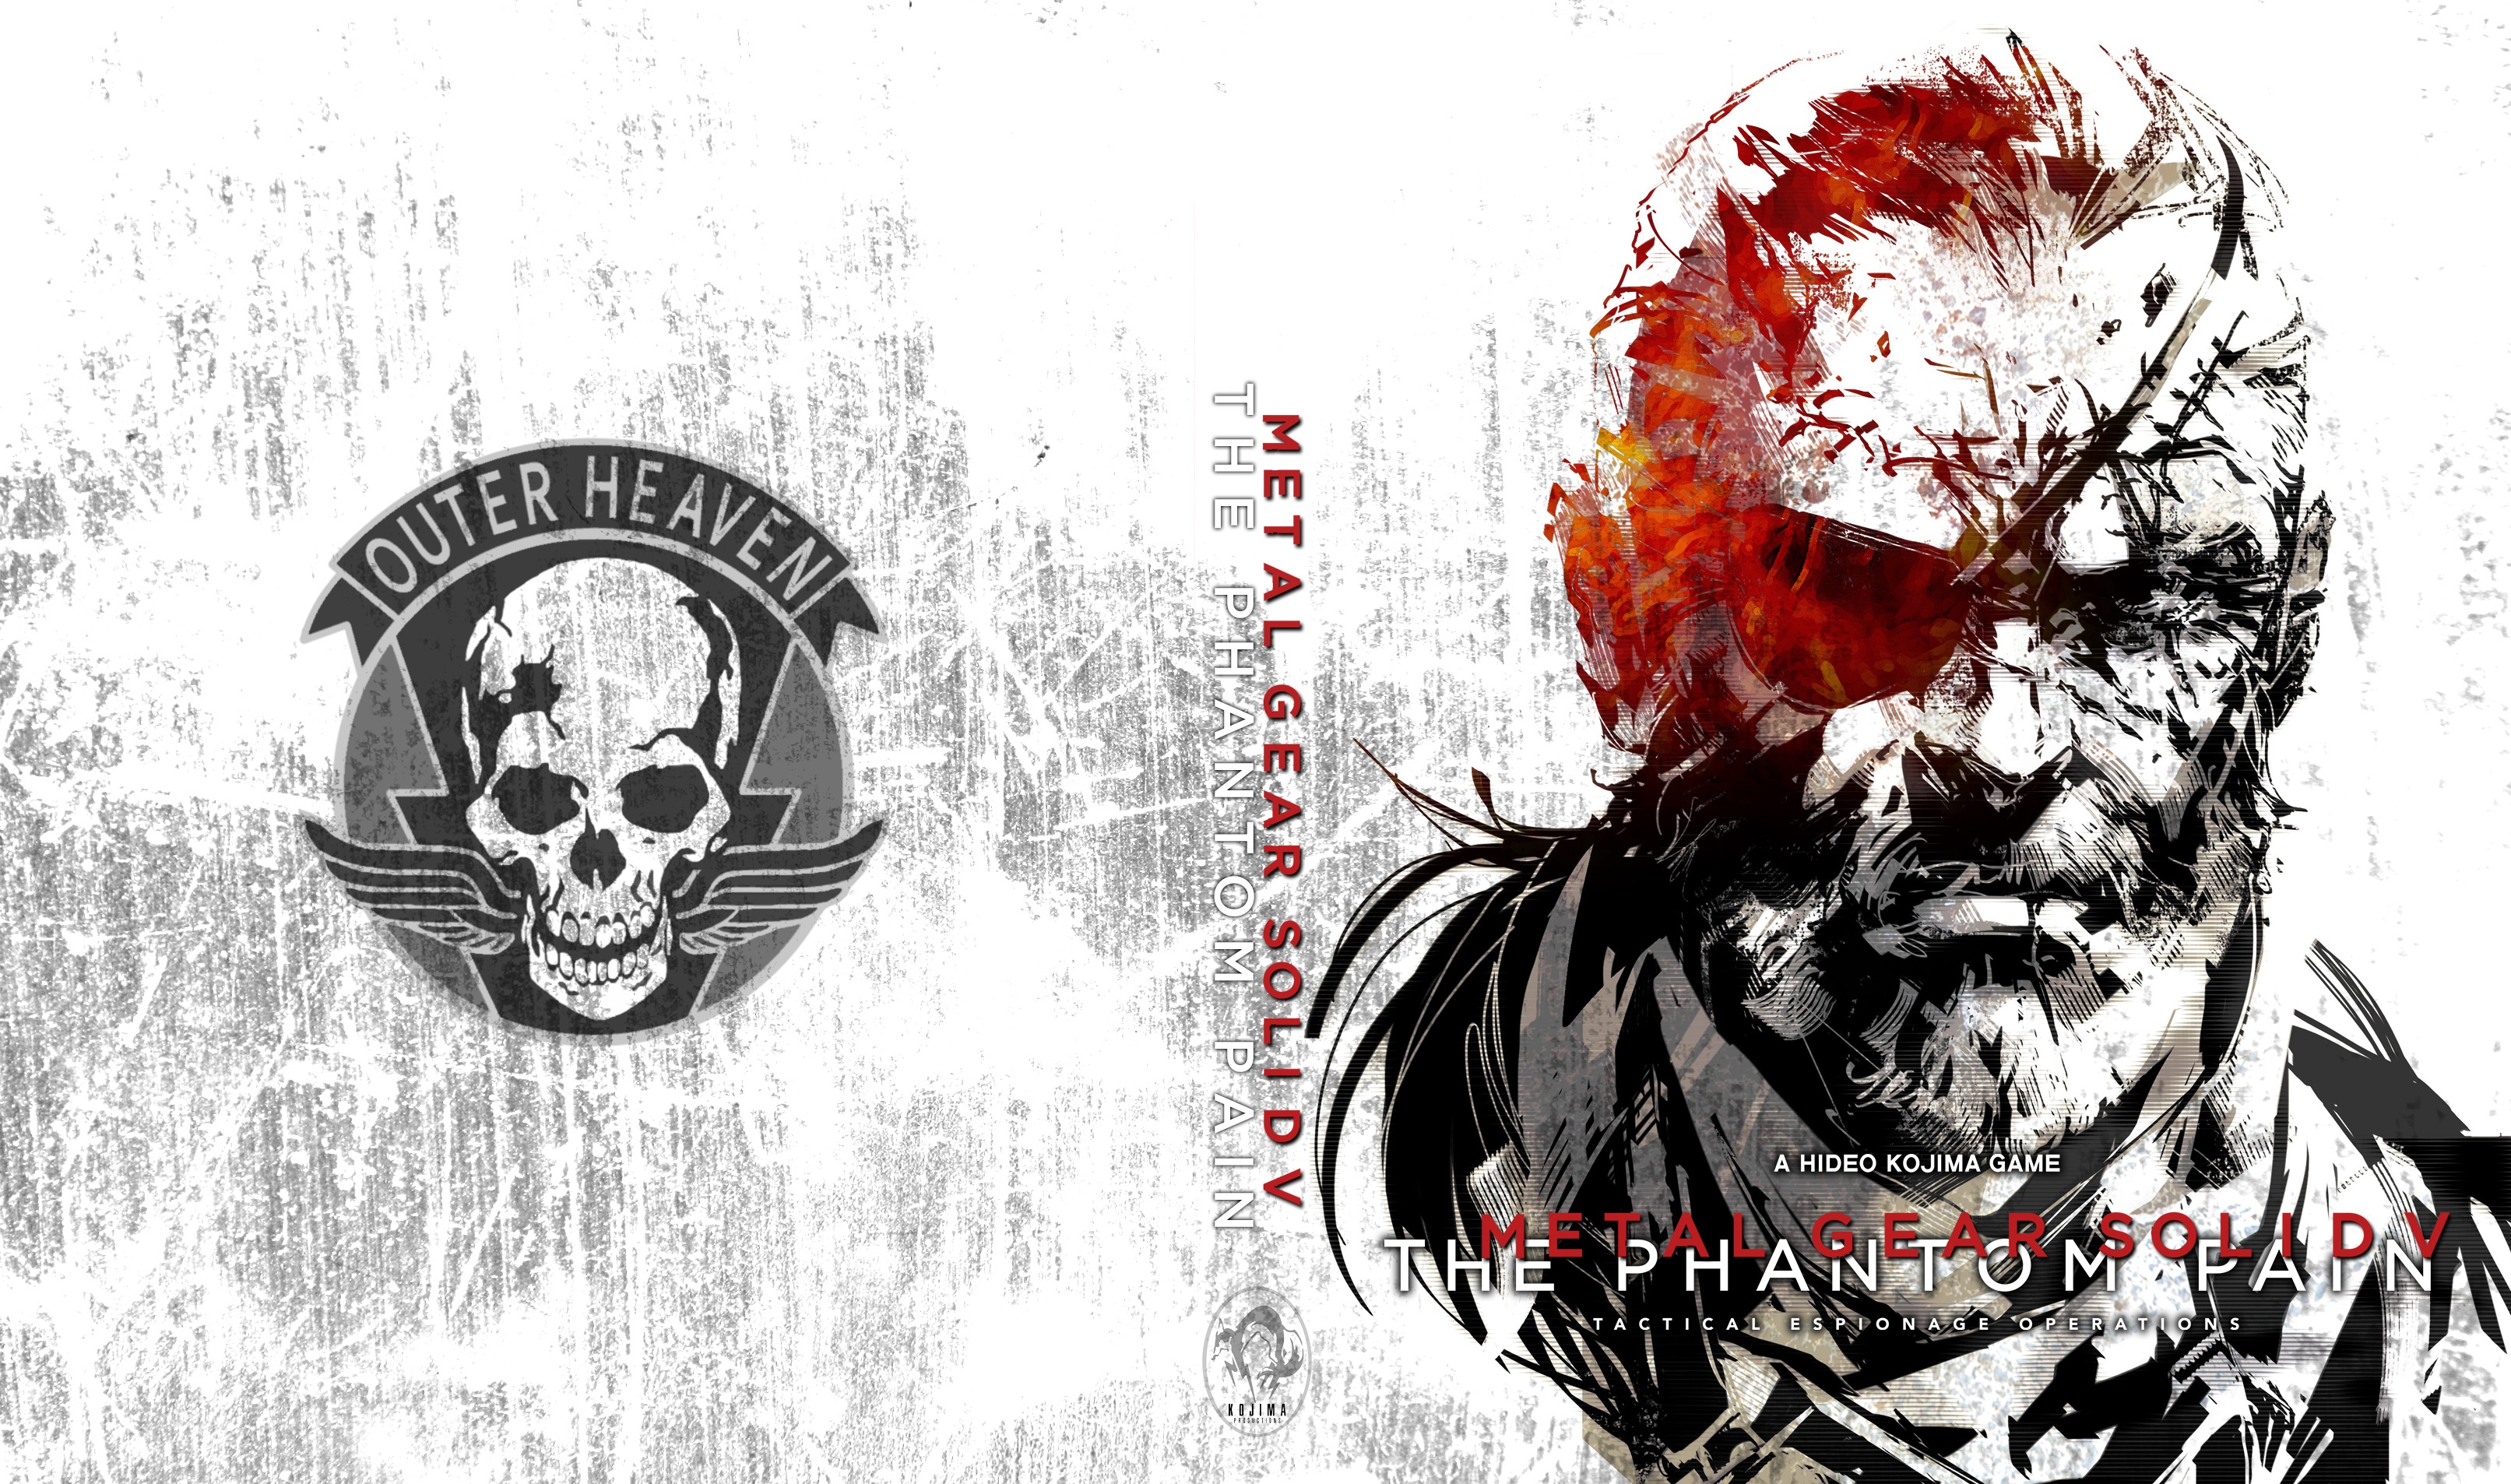 160+ Metal Gear Solid V: The Phantom Pain HD Wallpapers and Backgrounds